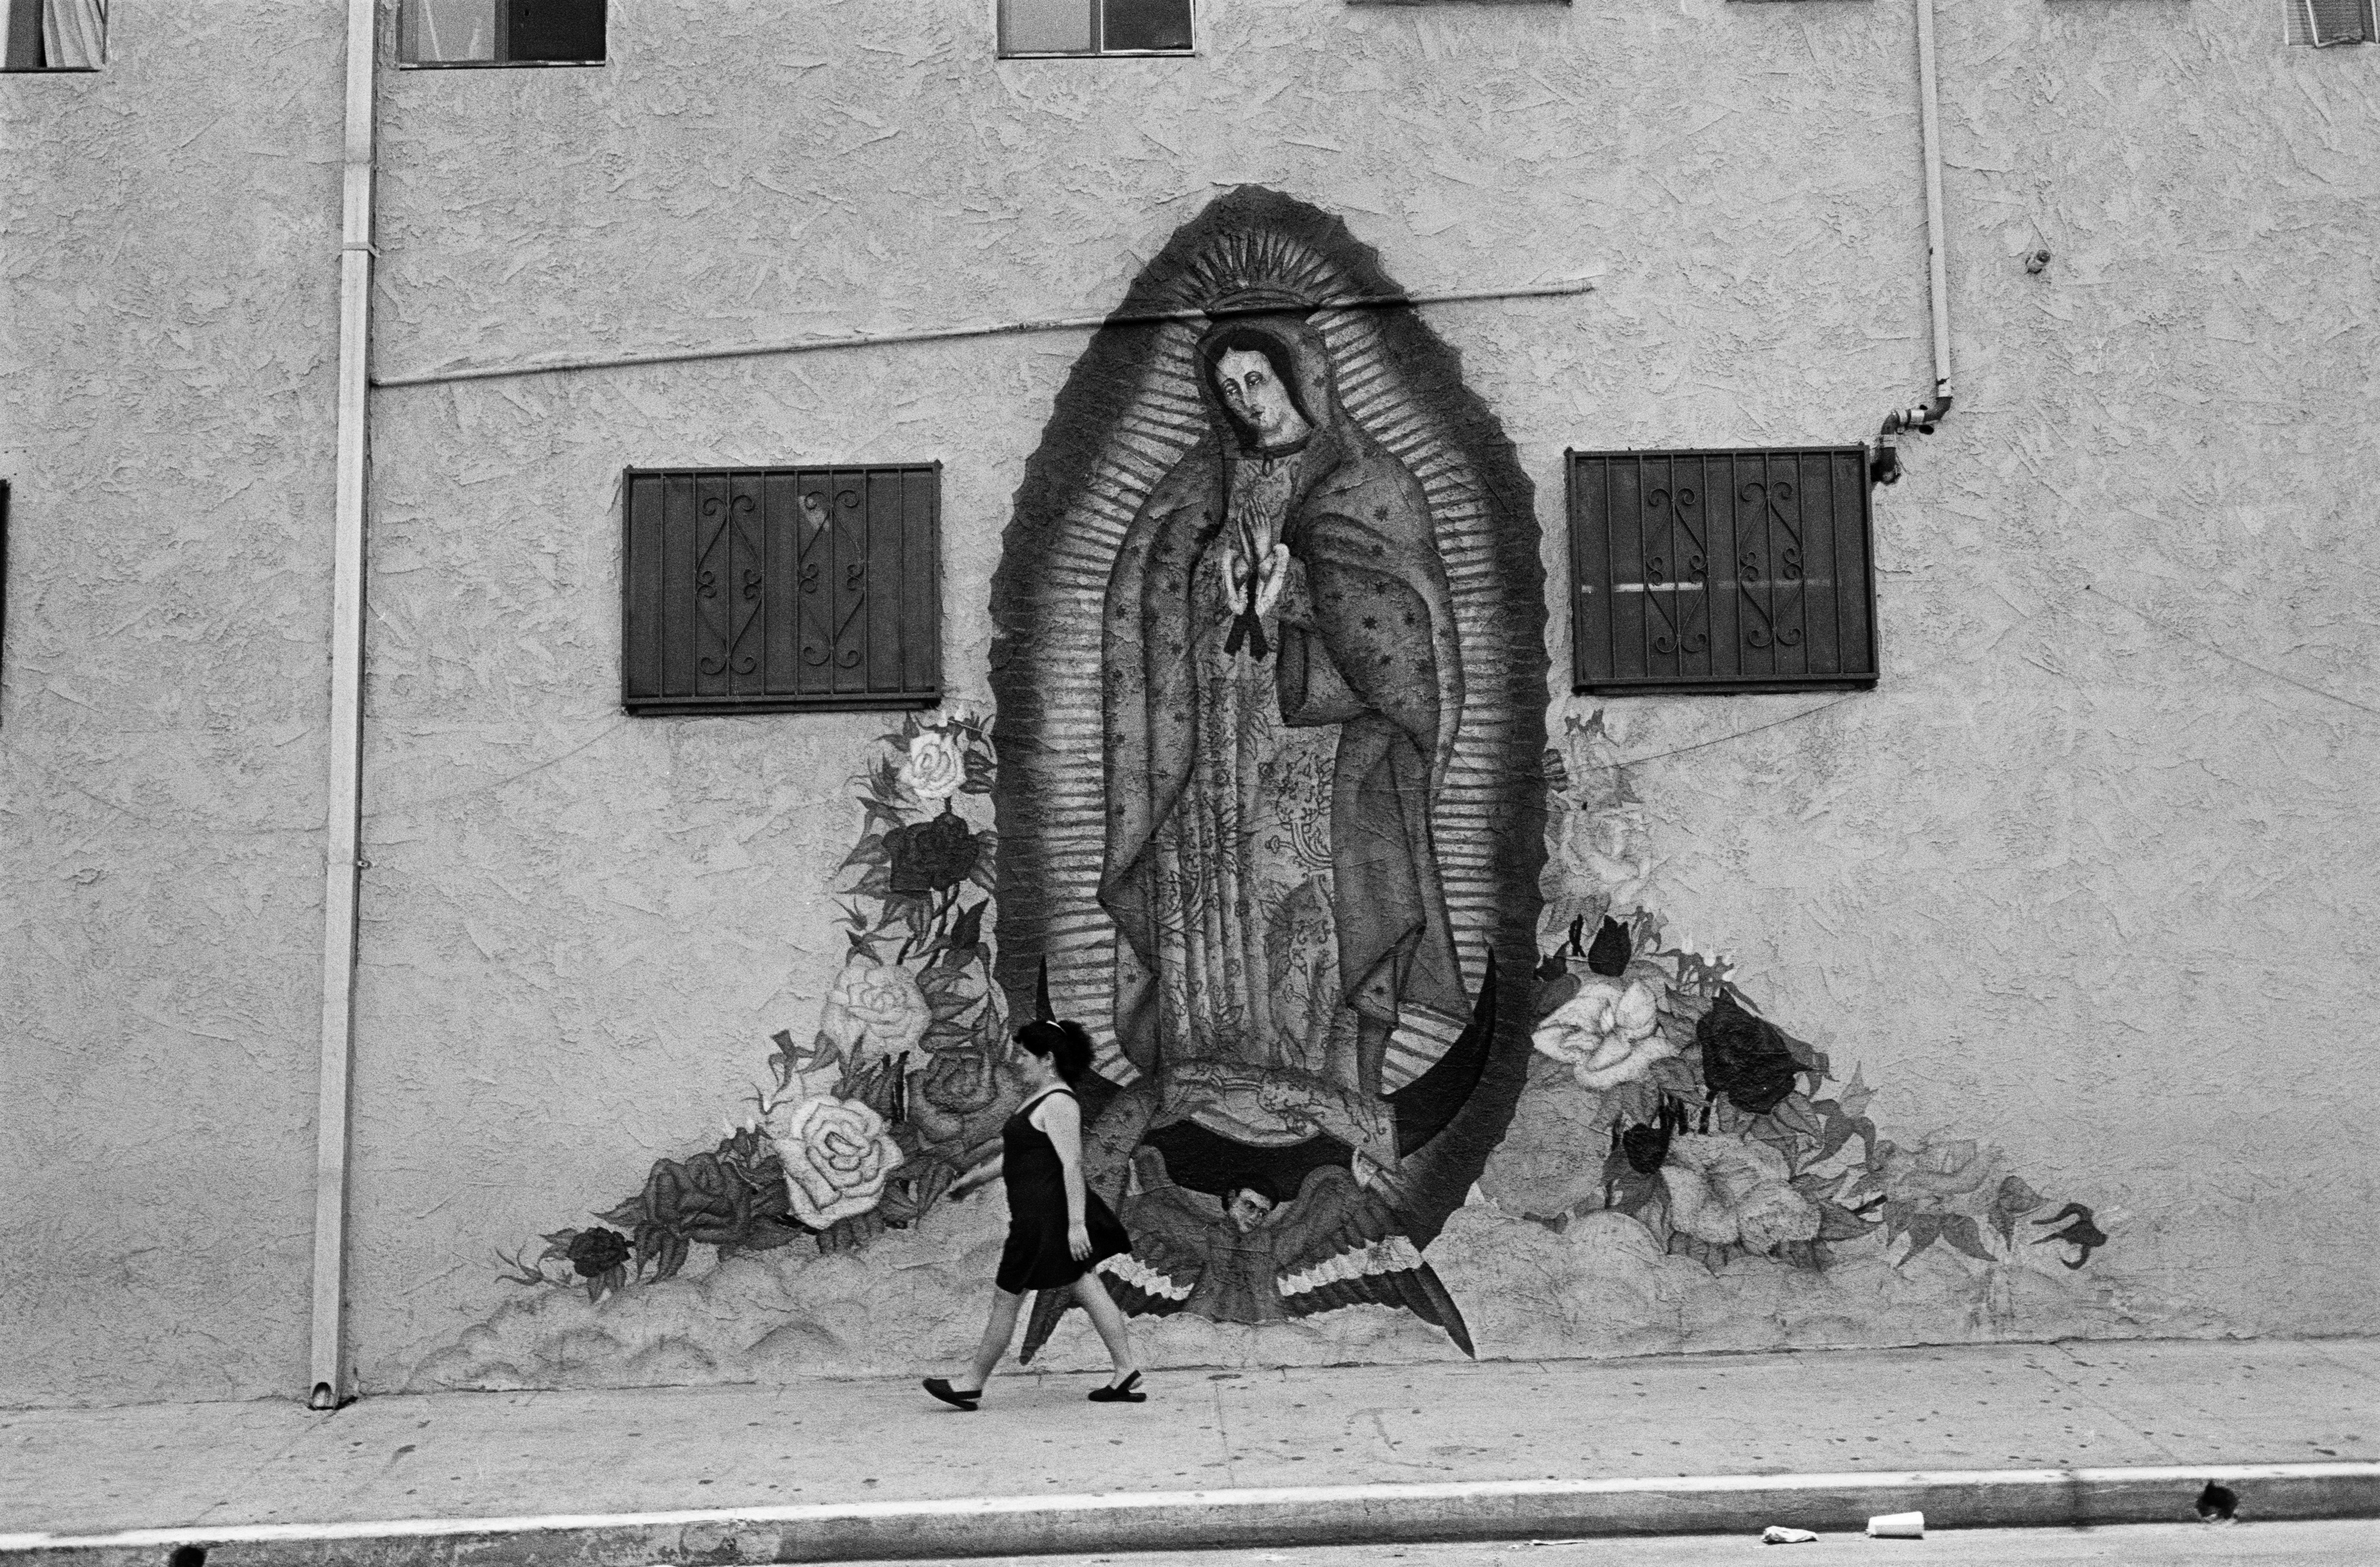 The Virgin de Guadalupe.South Central, Los Angeles CA, 1992